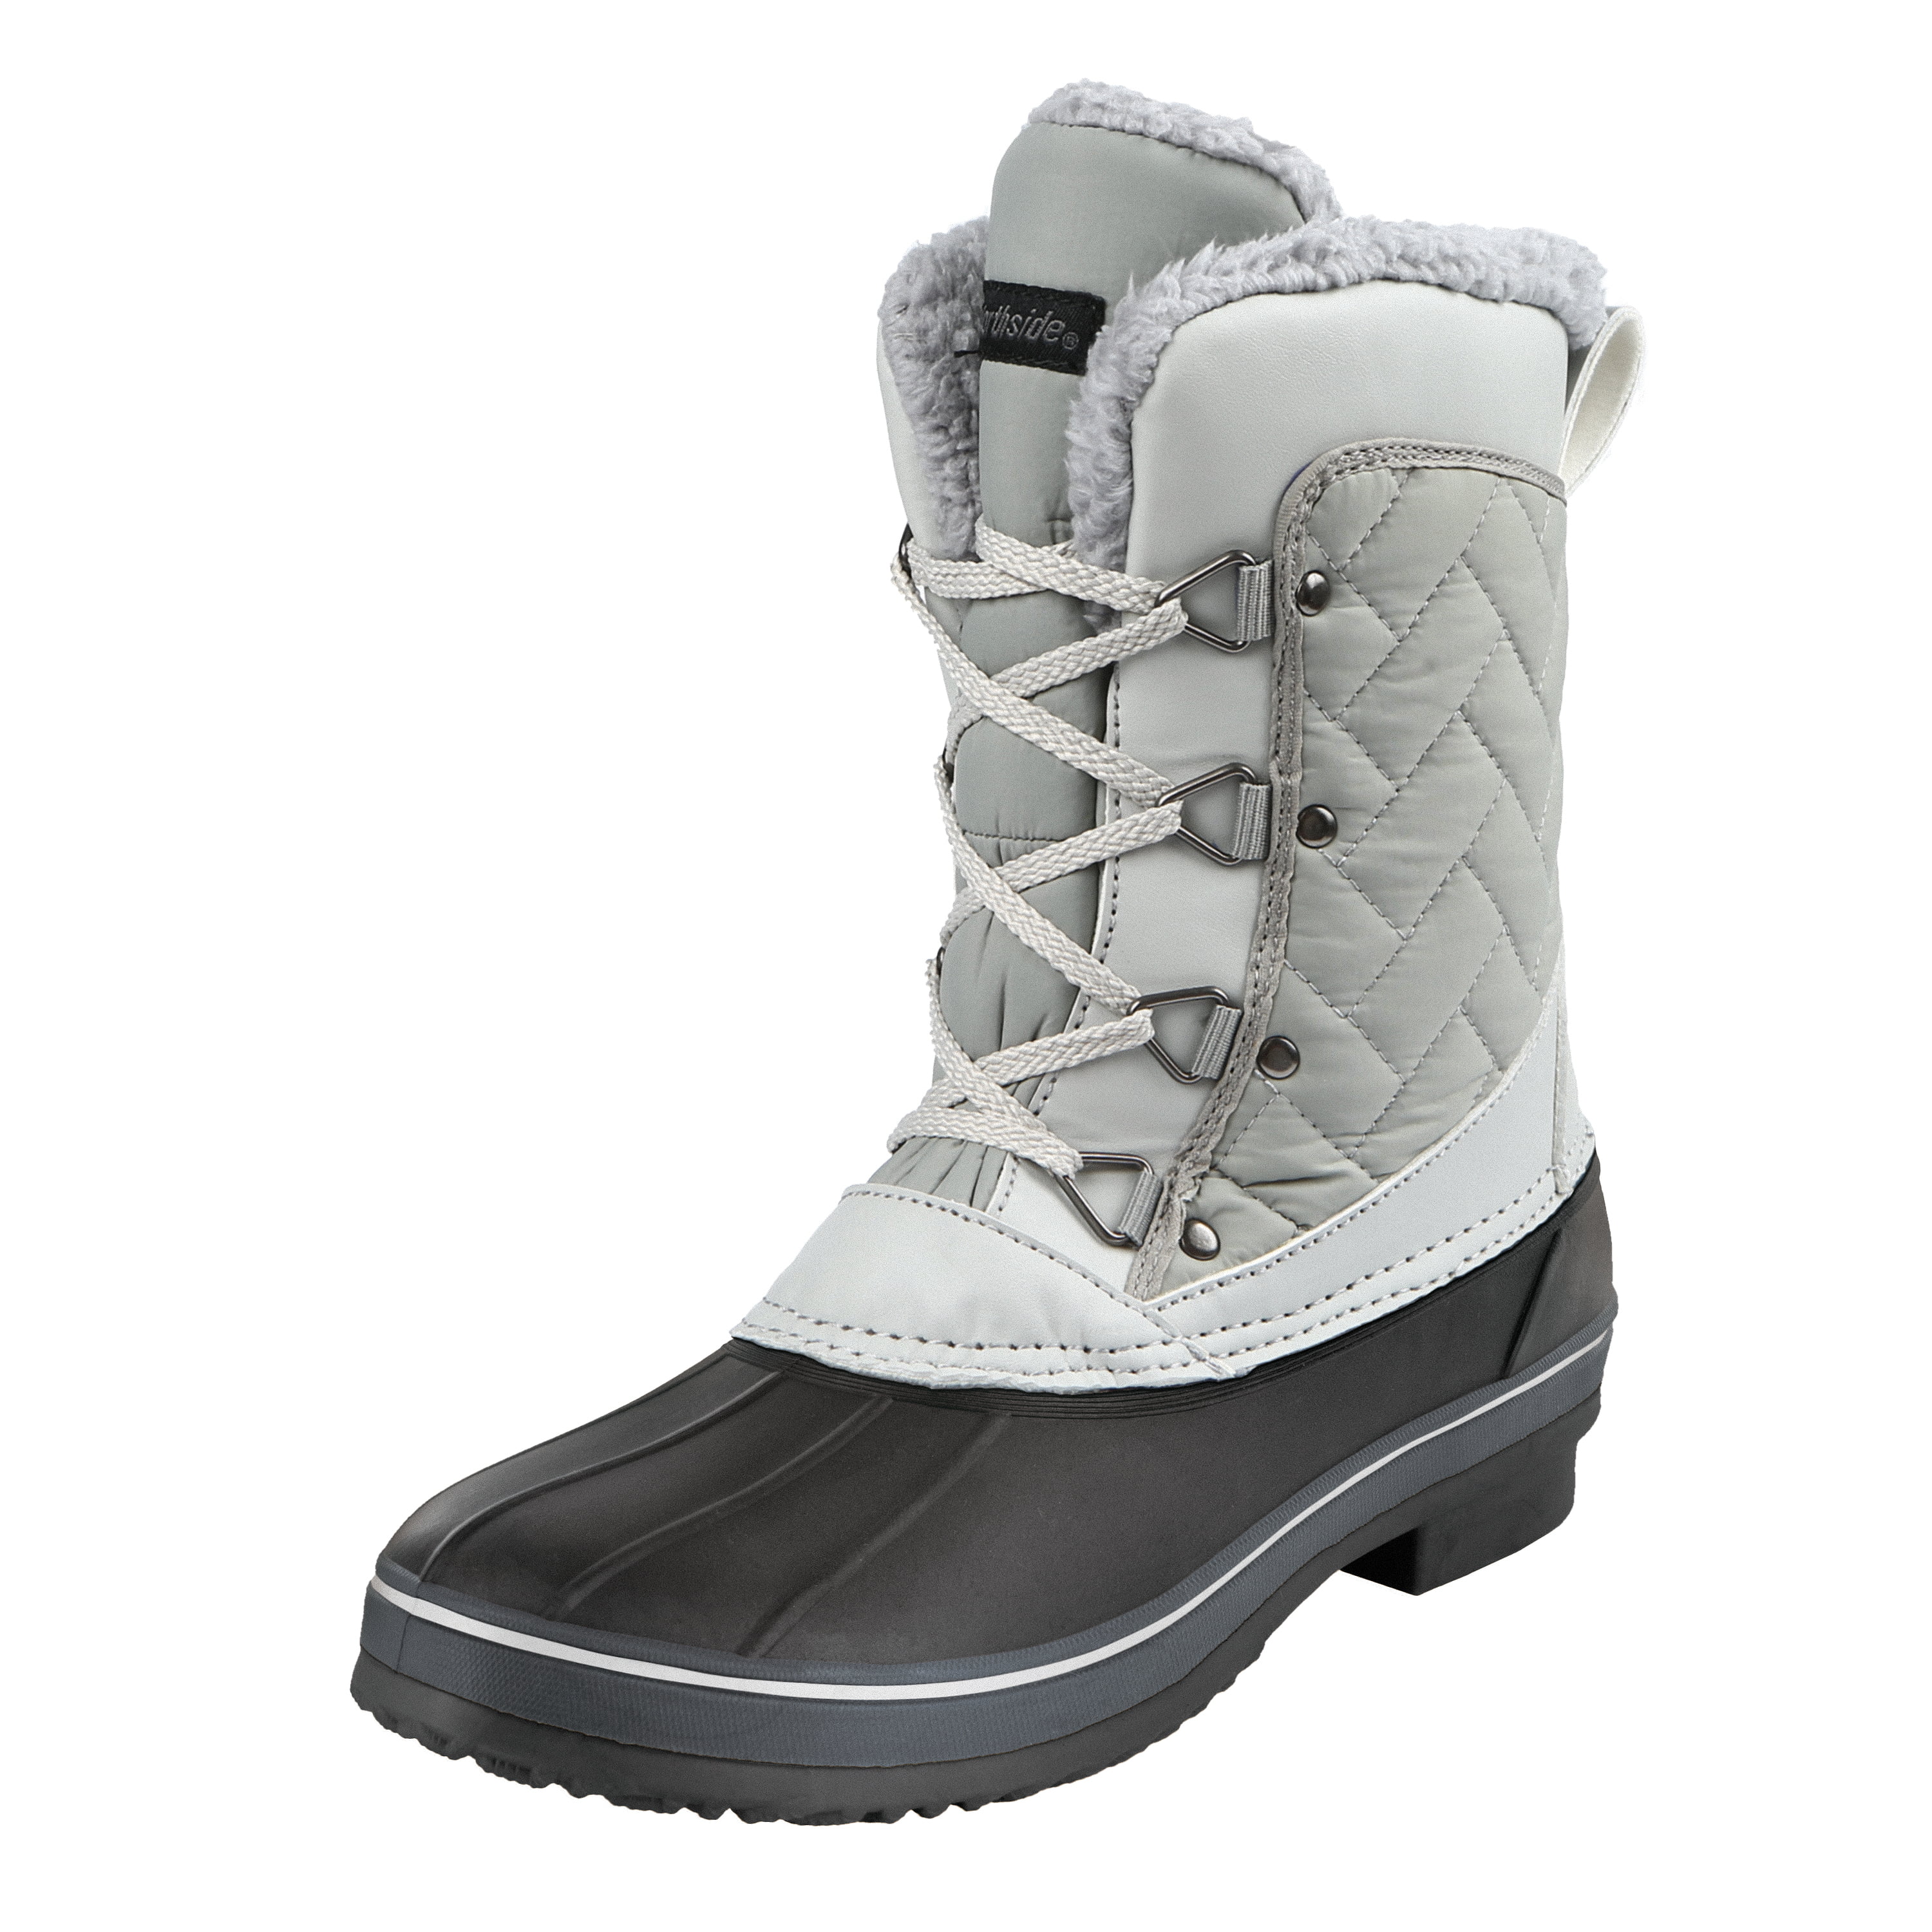 northside snow boots